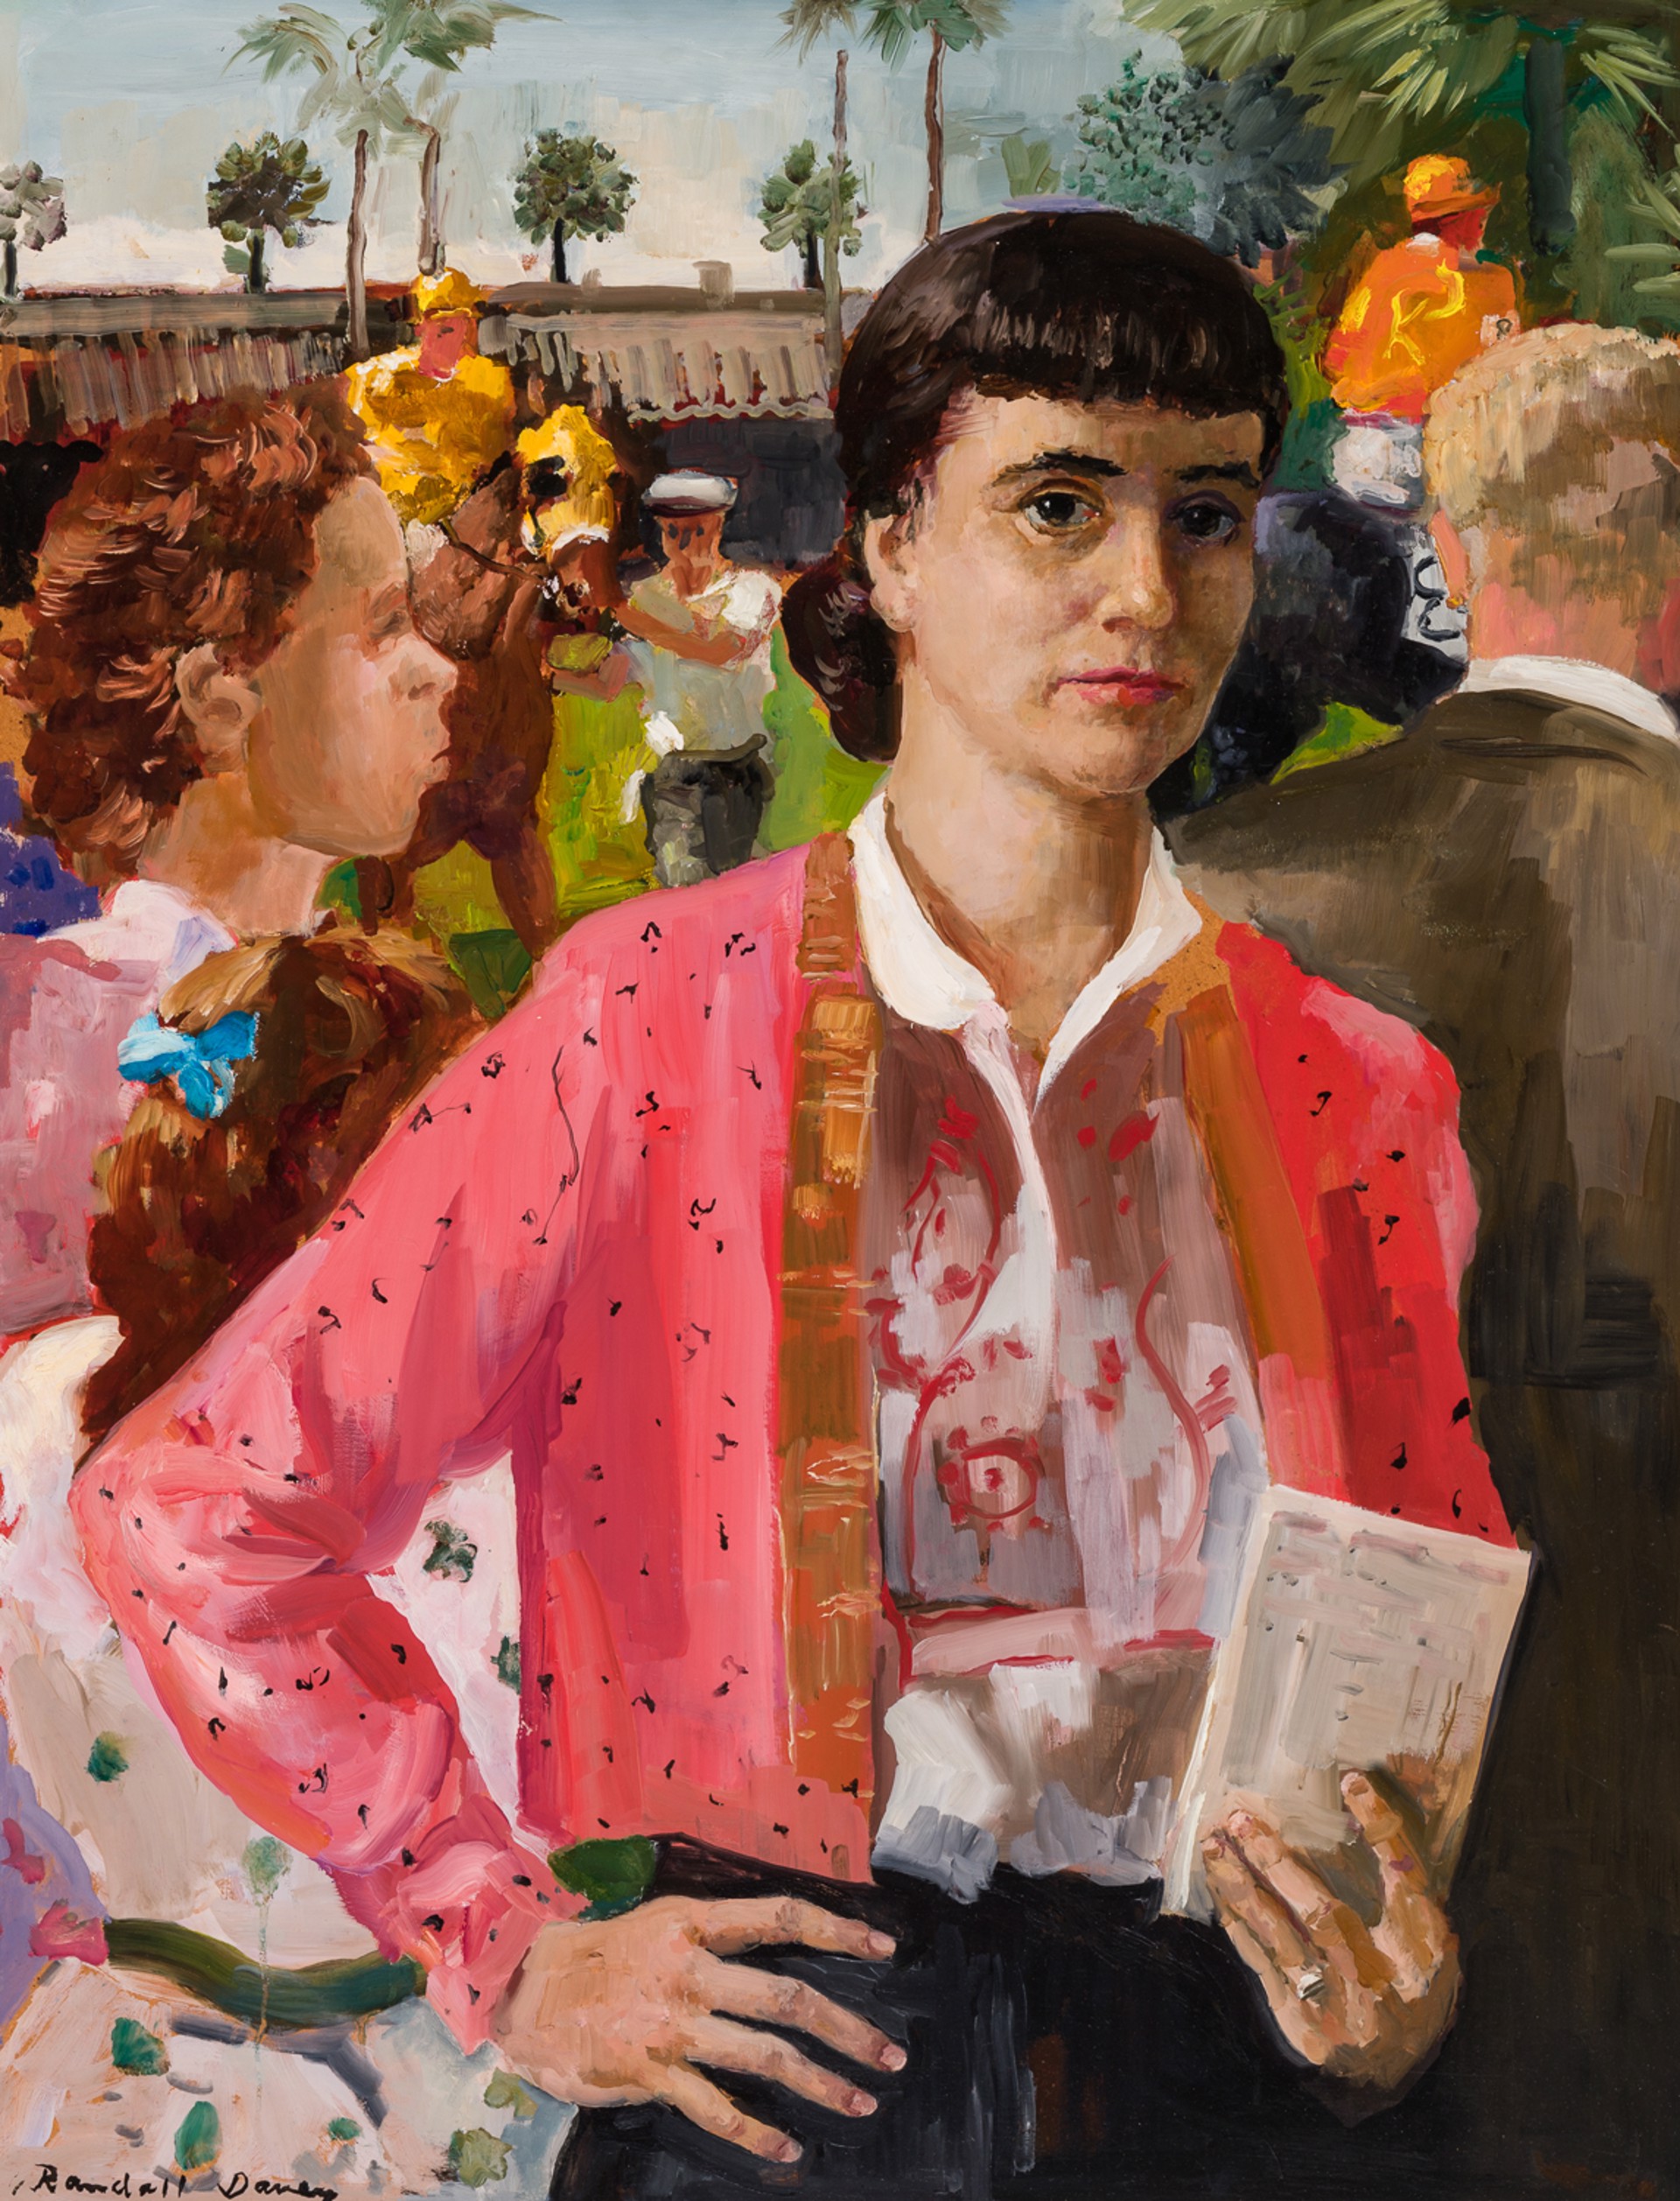 WOMAN AT THE RACES by Randall Davey